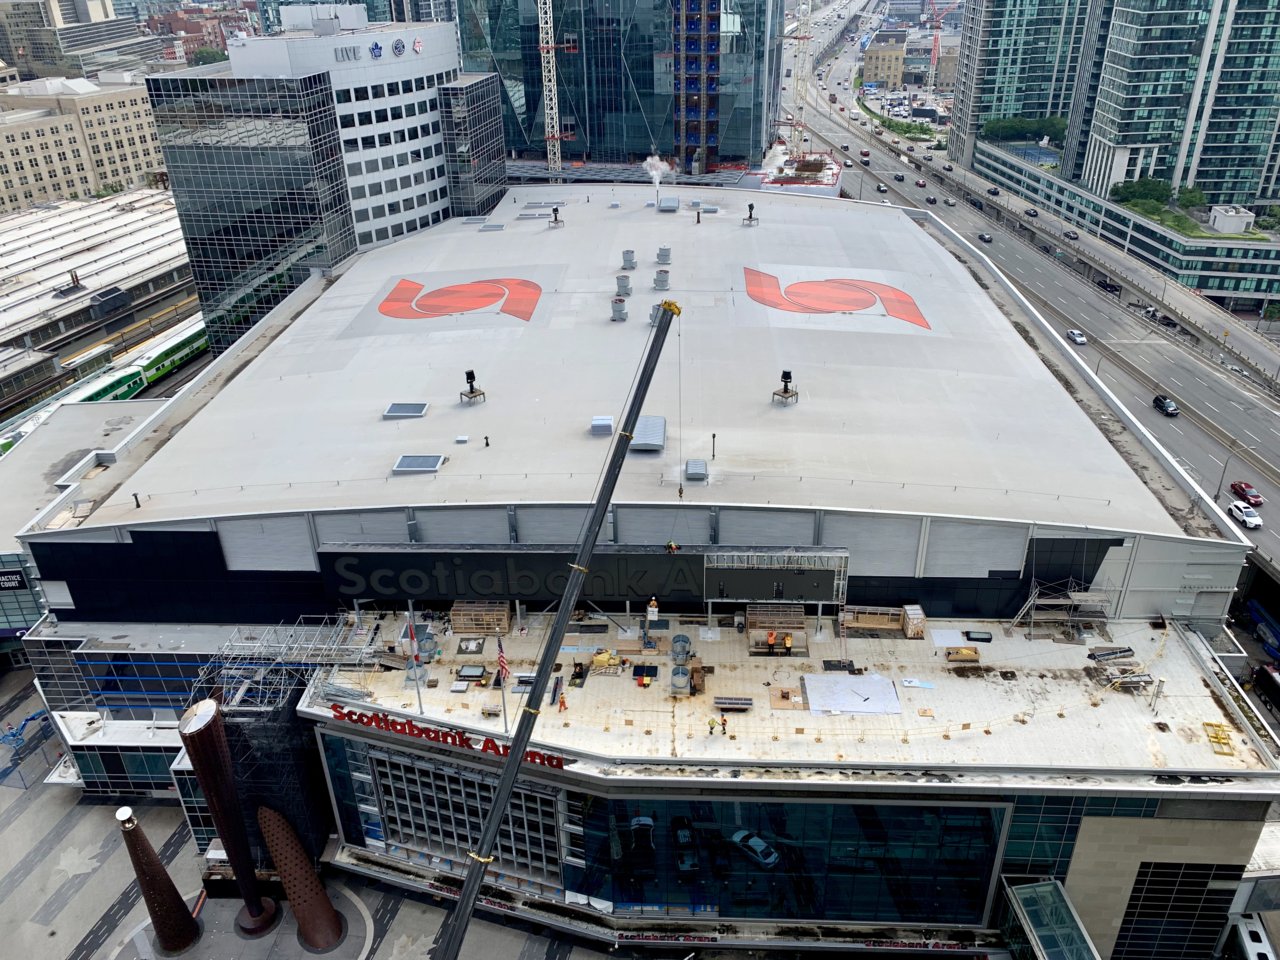 scotiabank arena guided tours